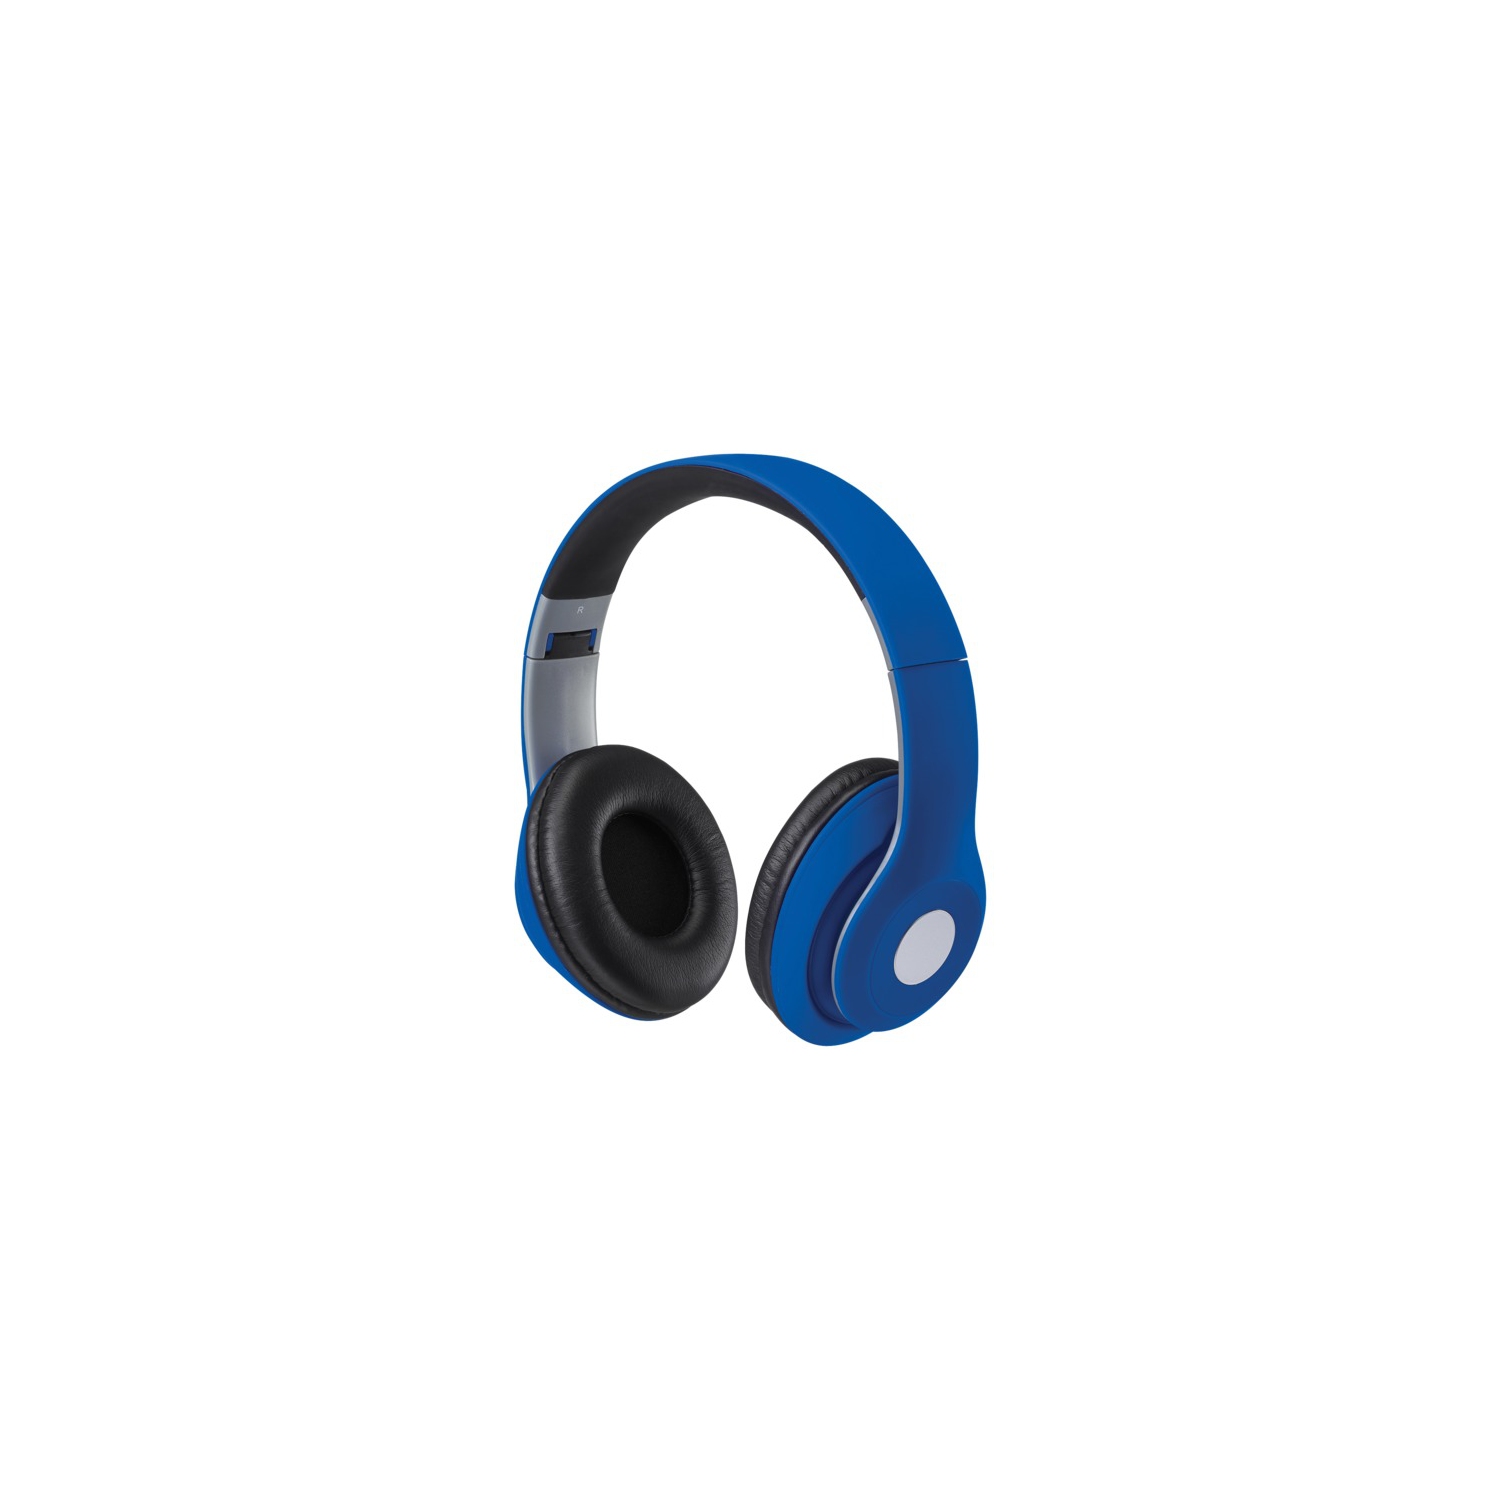 iLive Bluetooth On-Ear Headphones, Includes 3.5mm Audio Cable and Micro USB to USB Cable, Matte Blue (IAHB48MBU)